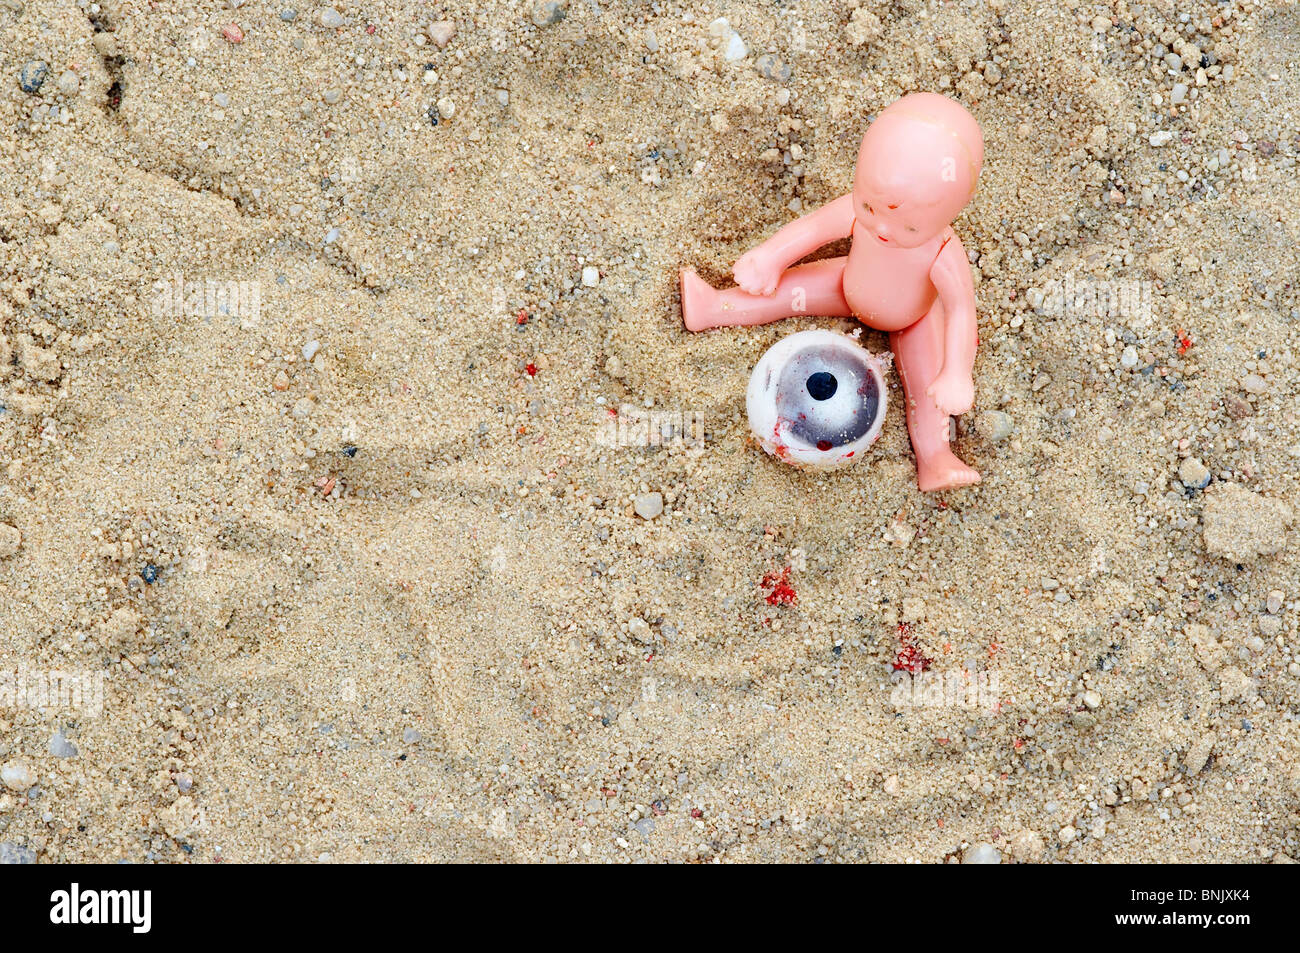 Surreal image - child on the sandpit Stock Photo